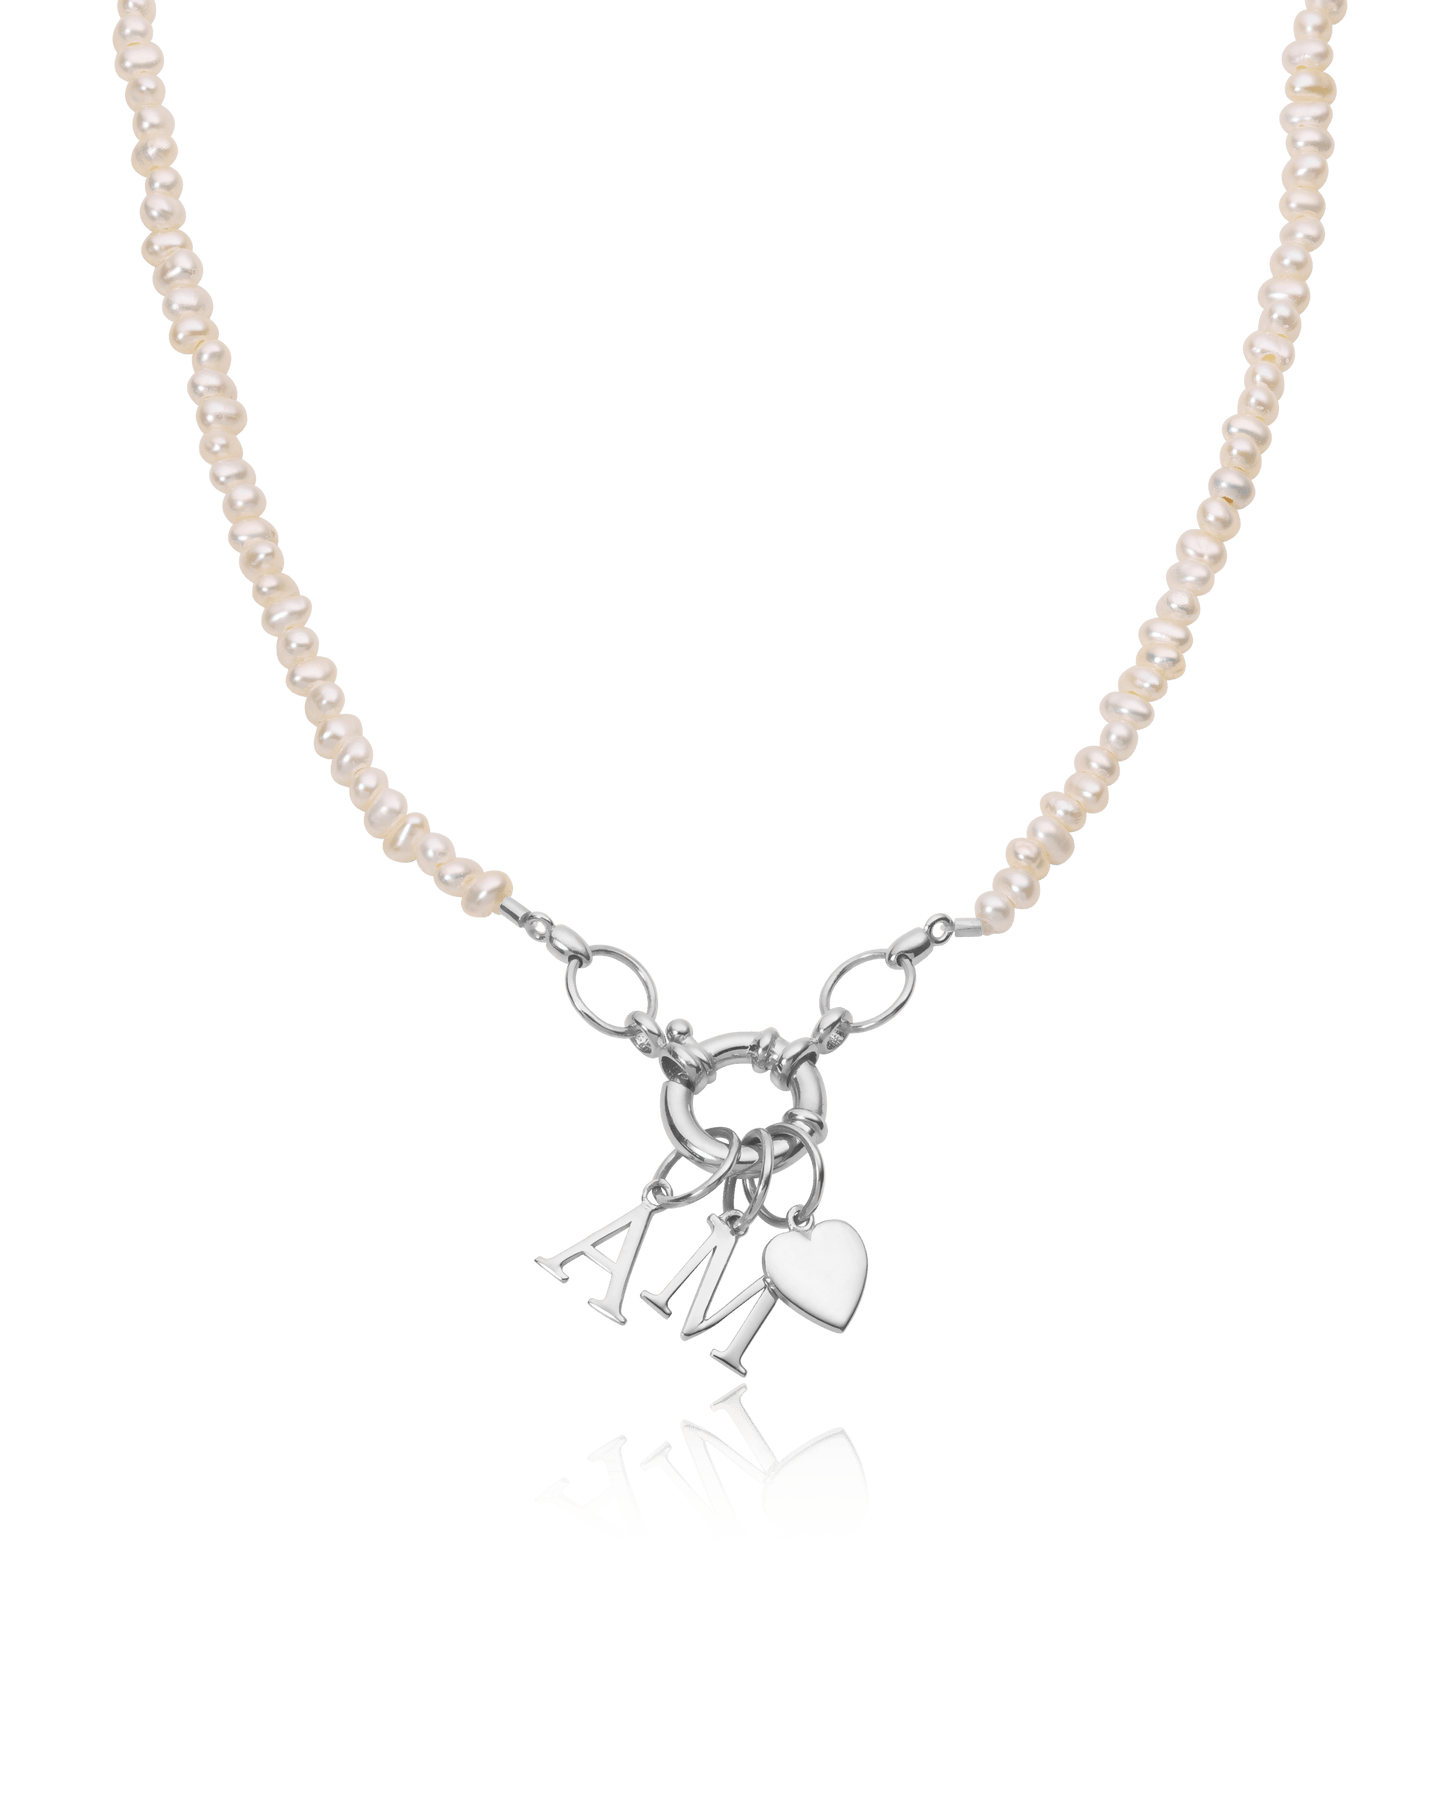 Watermelon Charm Lock Necklace - 925 Sterling Silver Necklaces magal-dev Pearl (OUT OF STOCK) 1 Charm 16"